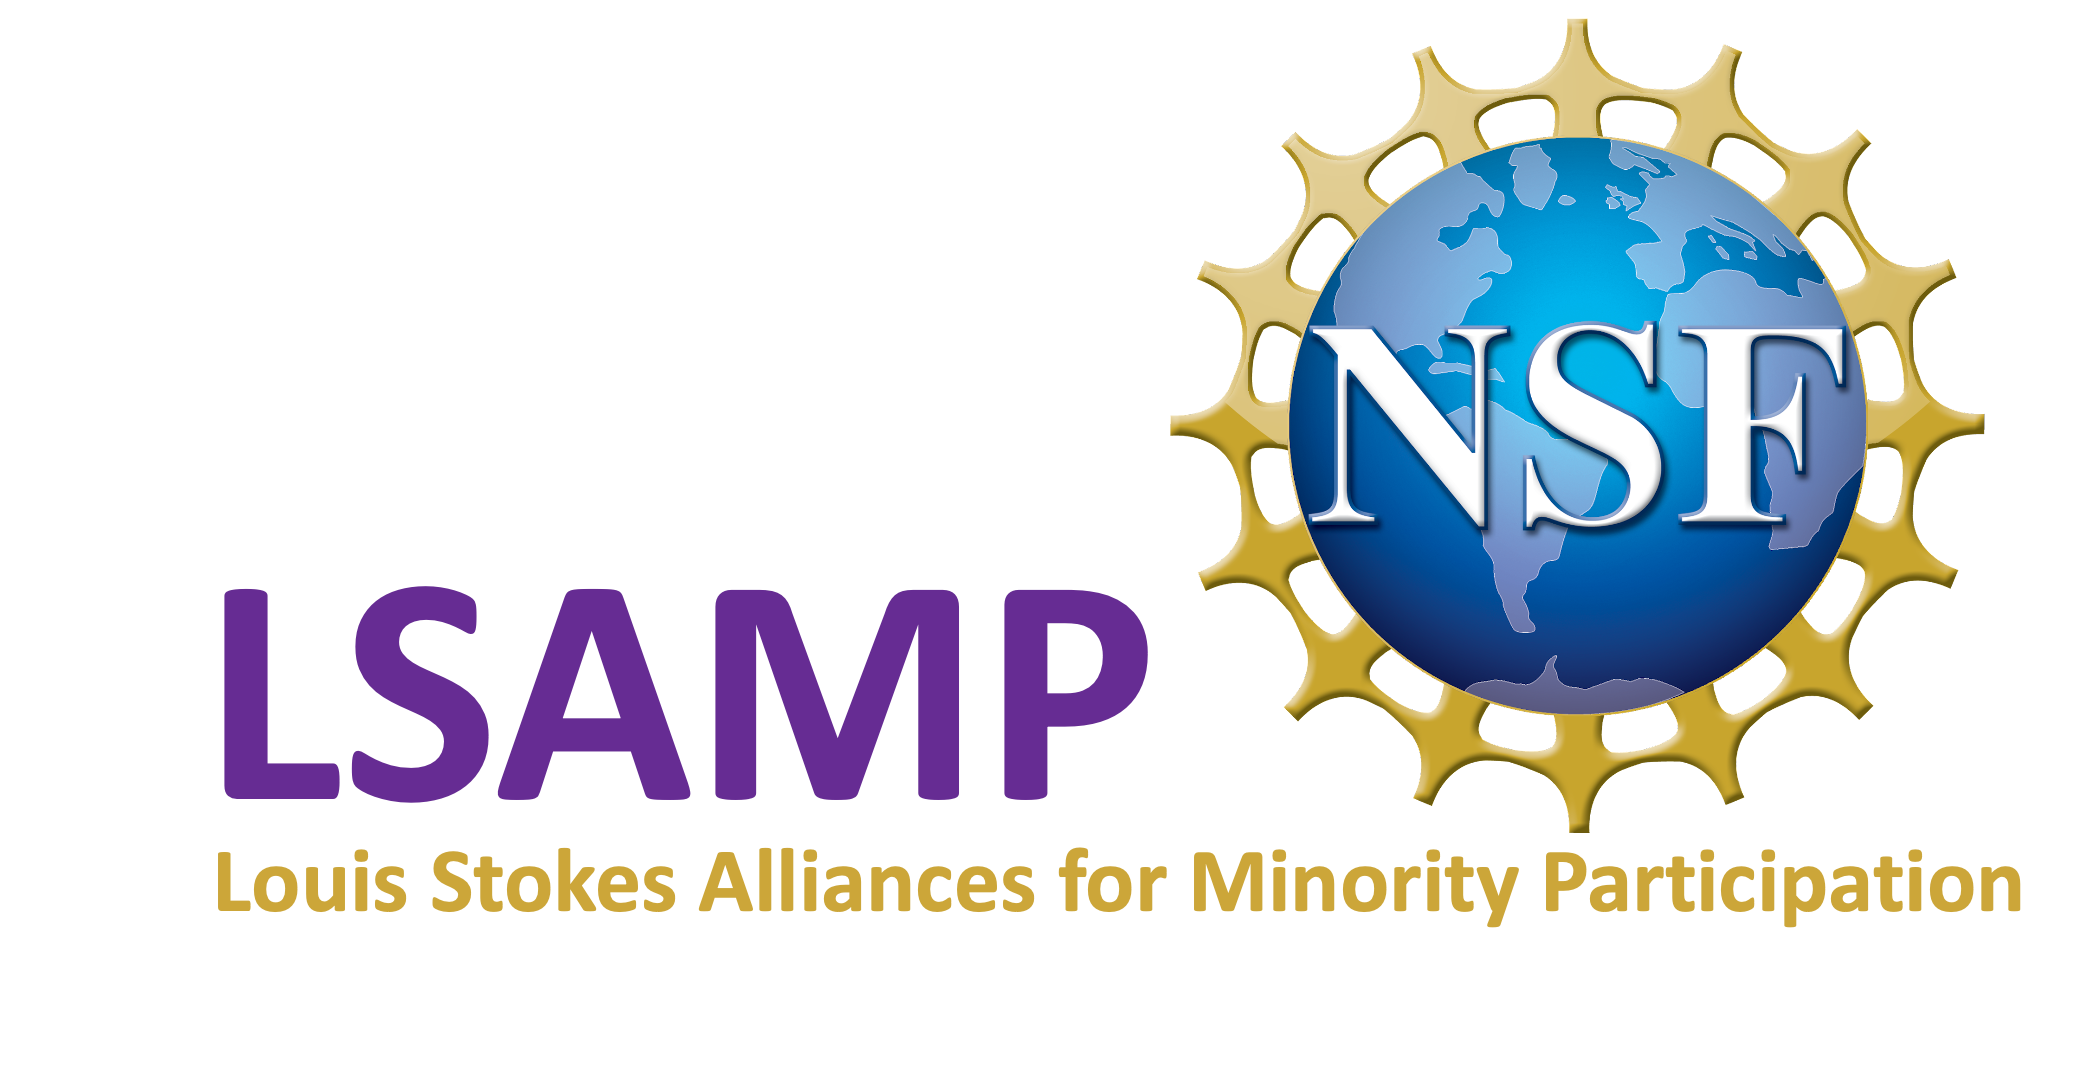 Louis Stokes Alliances for Minority Participation (LSAMP) program name with the NSF logo